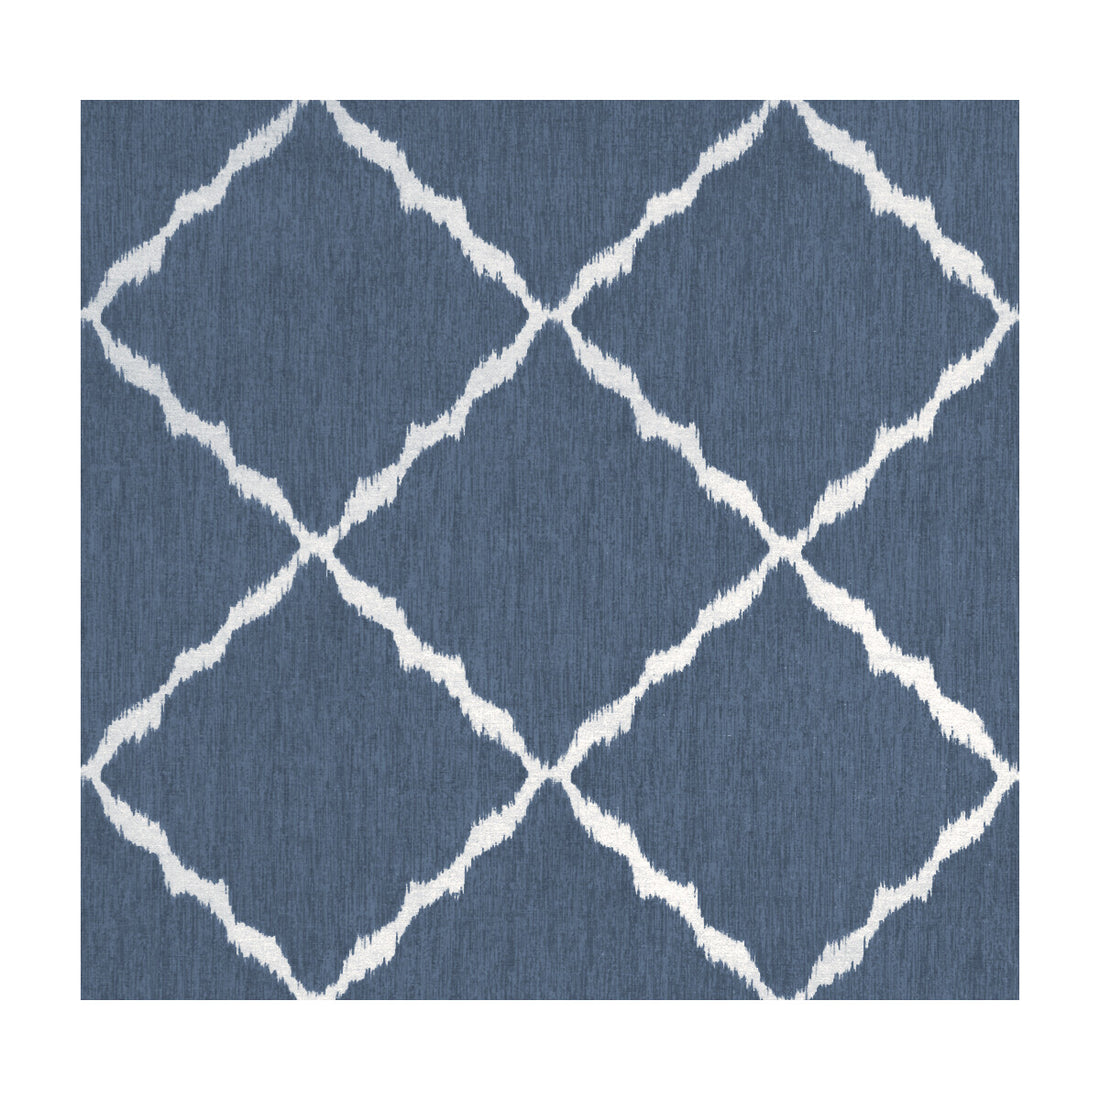 Ikat Strie fabric in indigo color - pattern IKATSTRIE.5.0 - by Kravet Basics in the Sarah Richardson Harmony collection